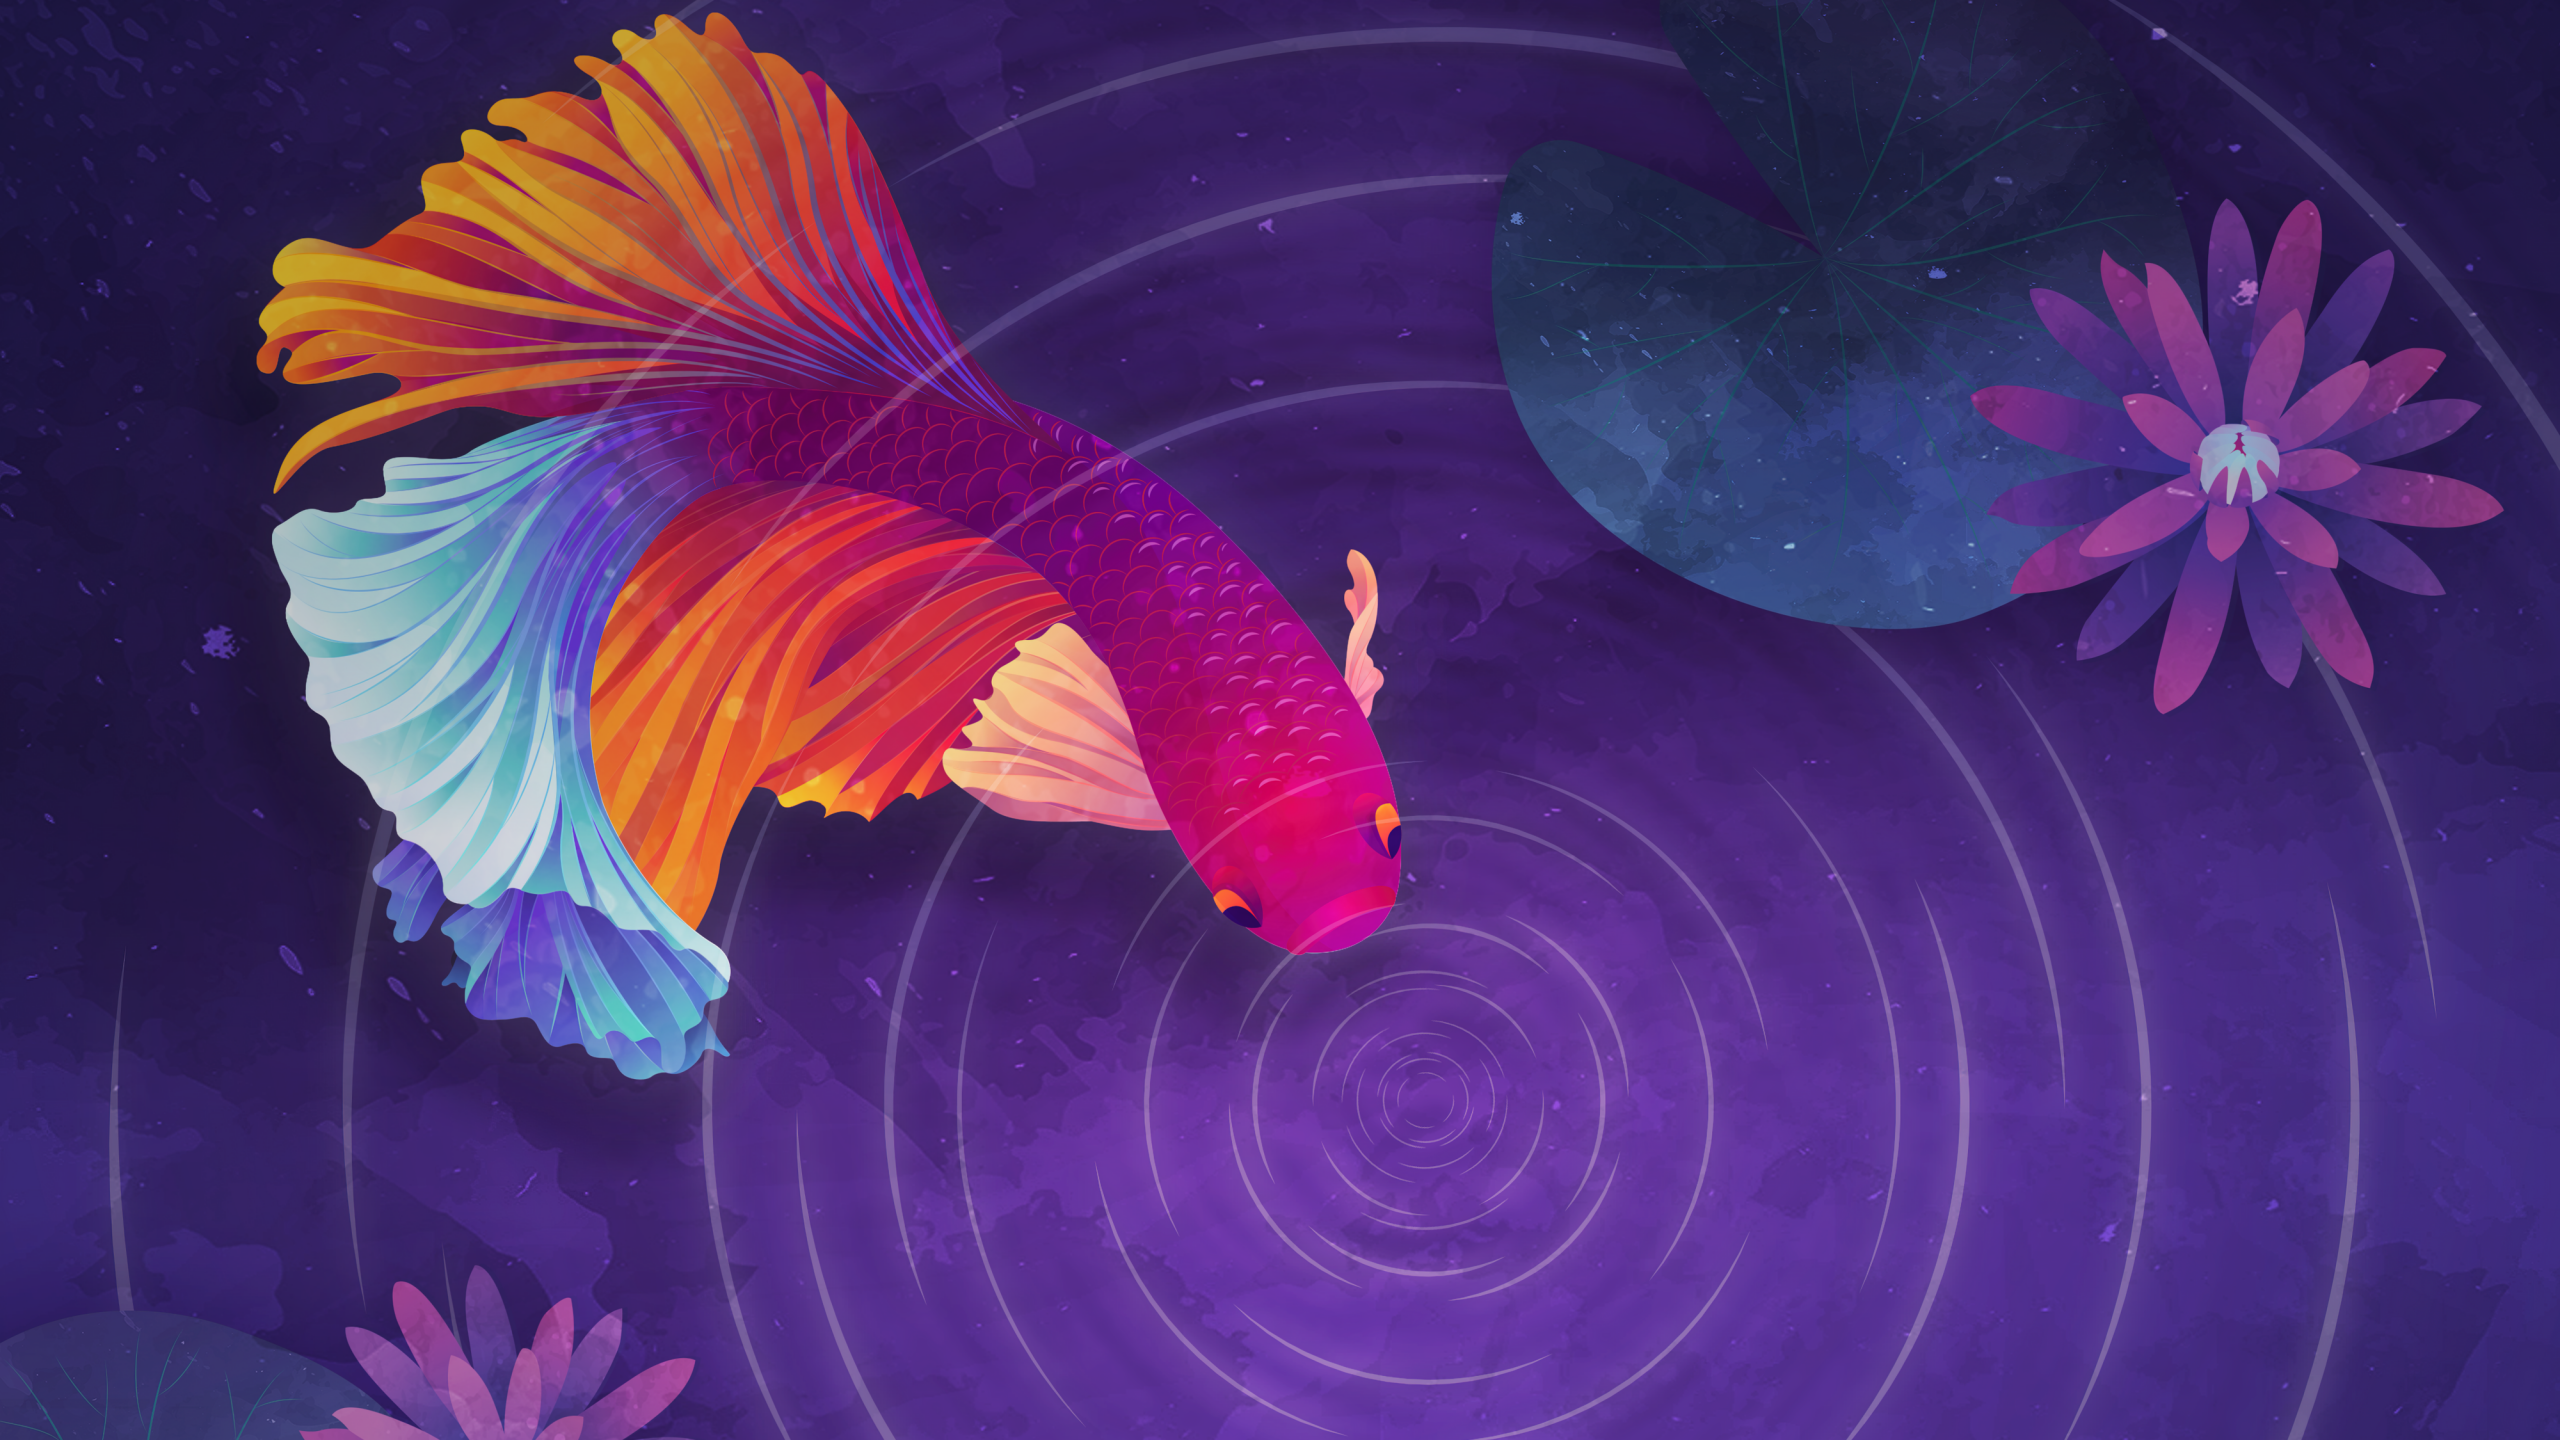 Colorful fish Wallpaper 4K, Ripple, Purple background, Girly background, Fantasy